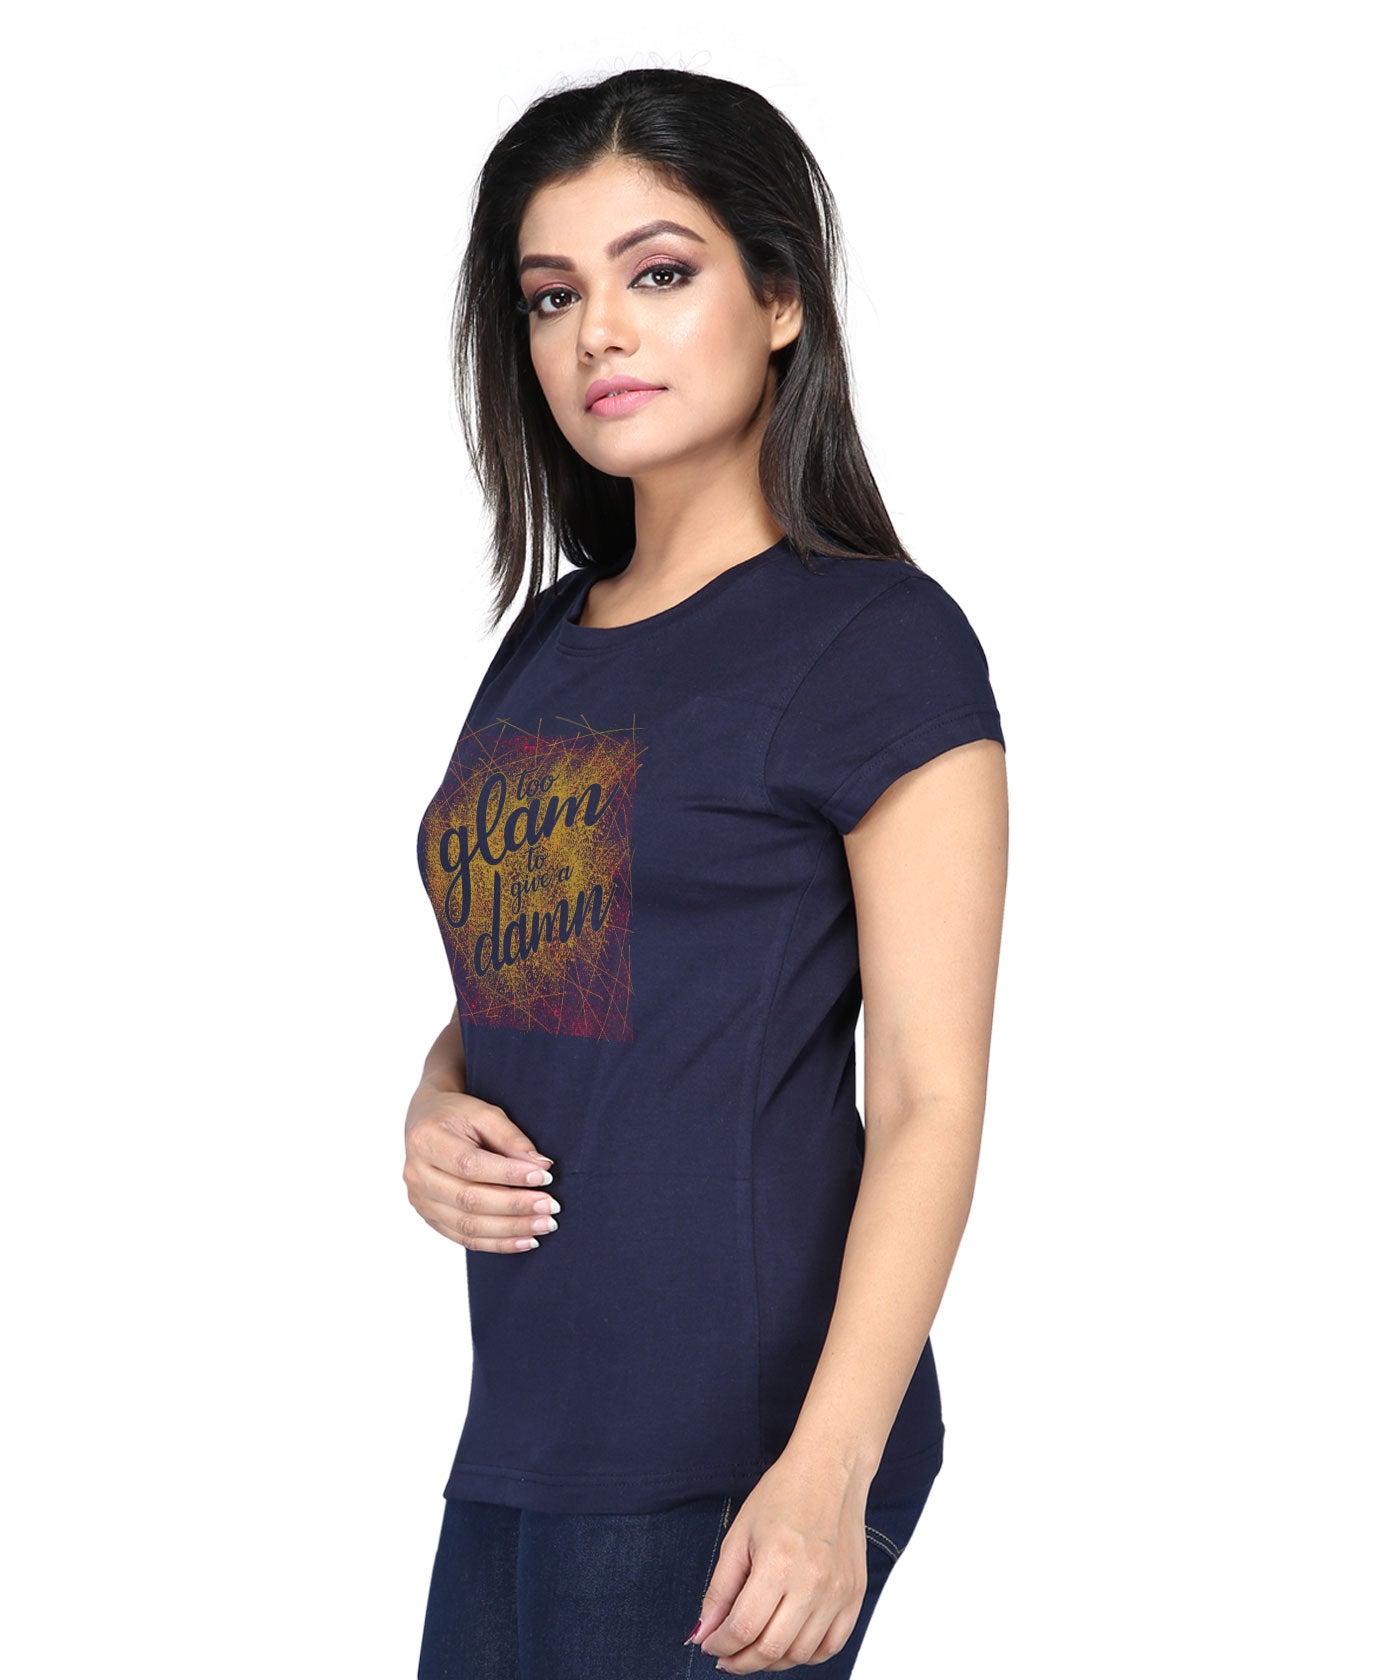 Too Glam To Give A Damn - Premium Round Neck Cotton Tees for Women - Navy Blue